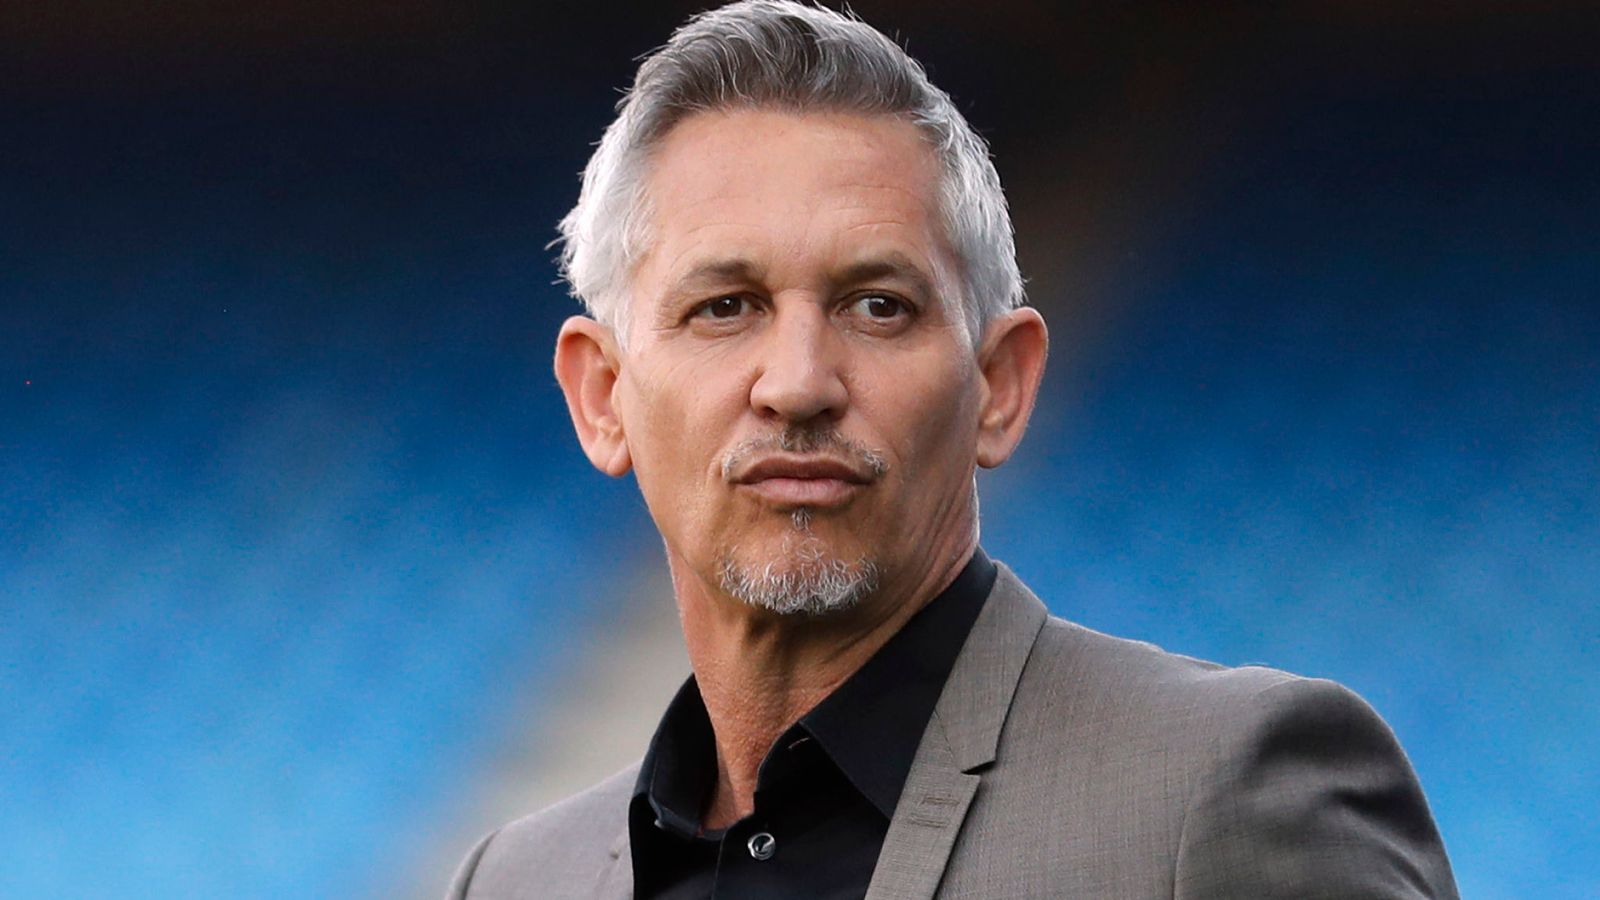 Gary Lineker joins campaign for second Brexit referendum – UK | Politic Mag